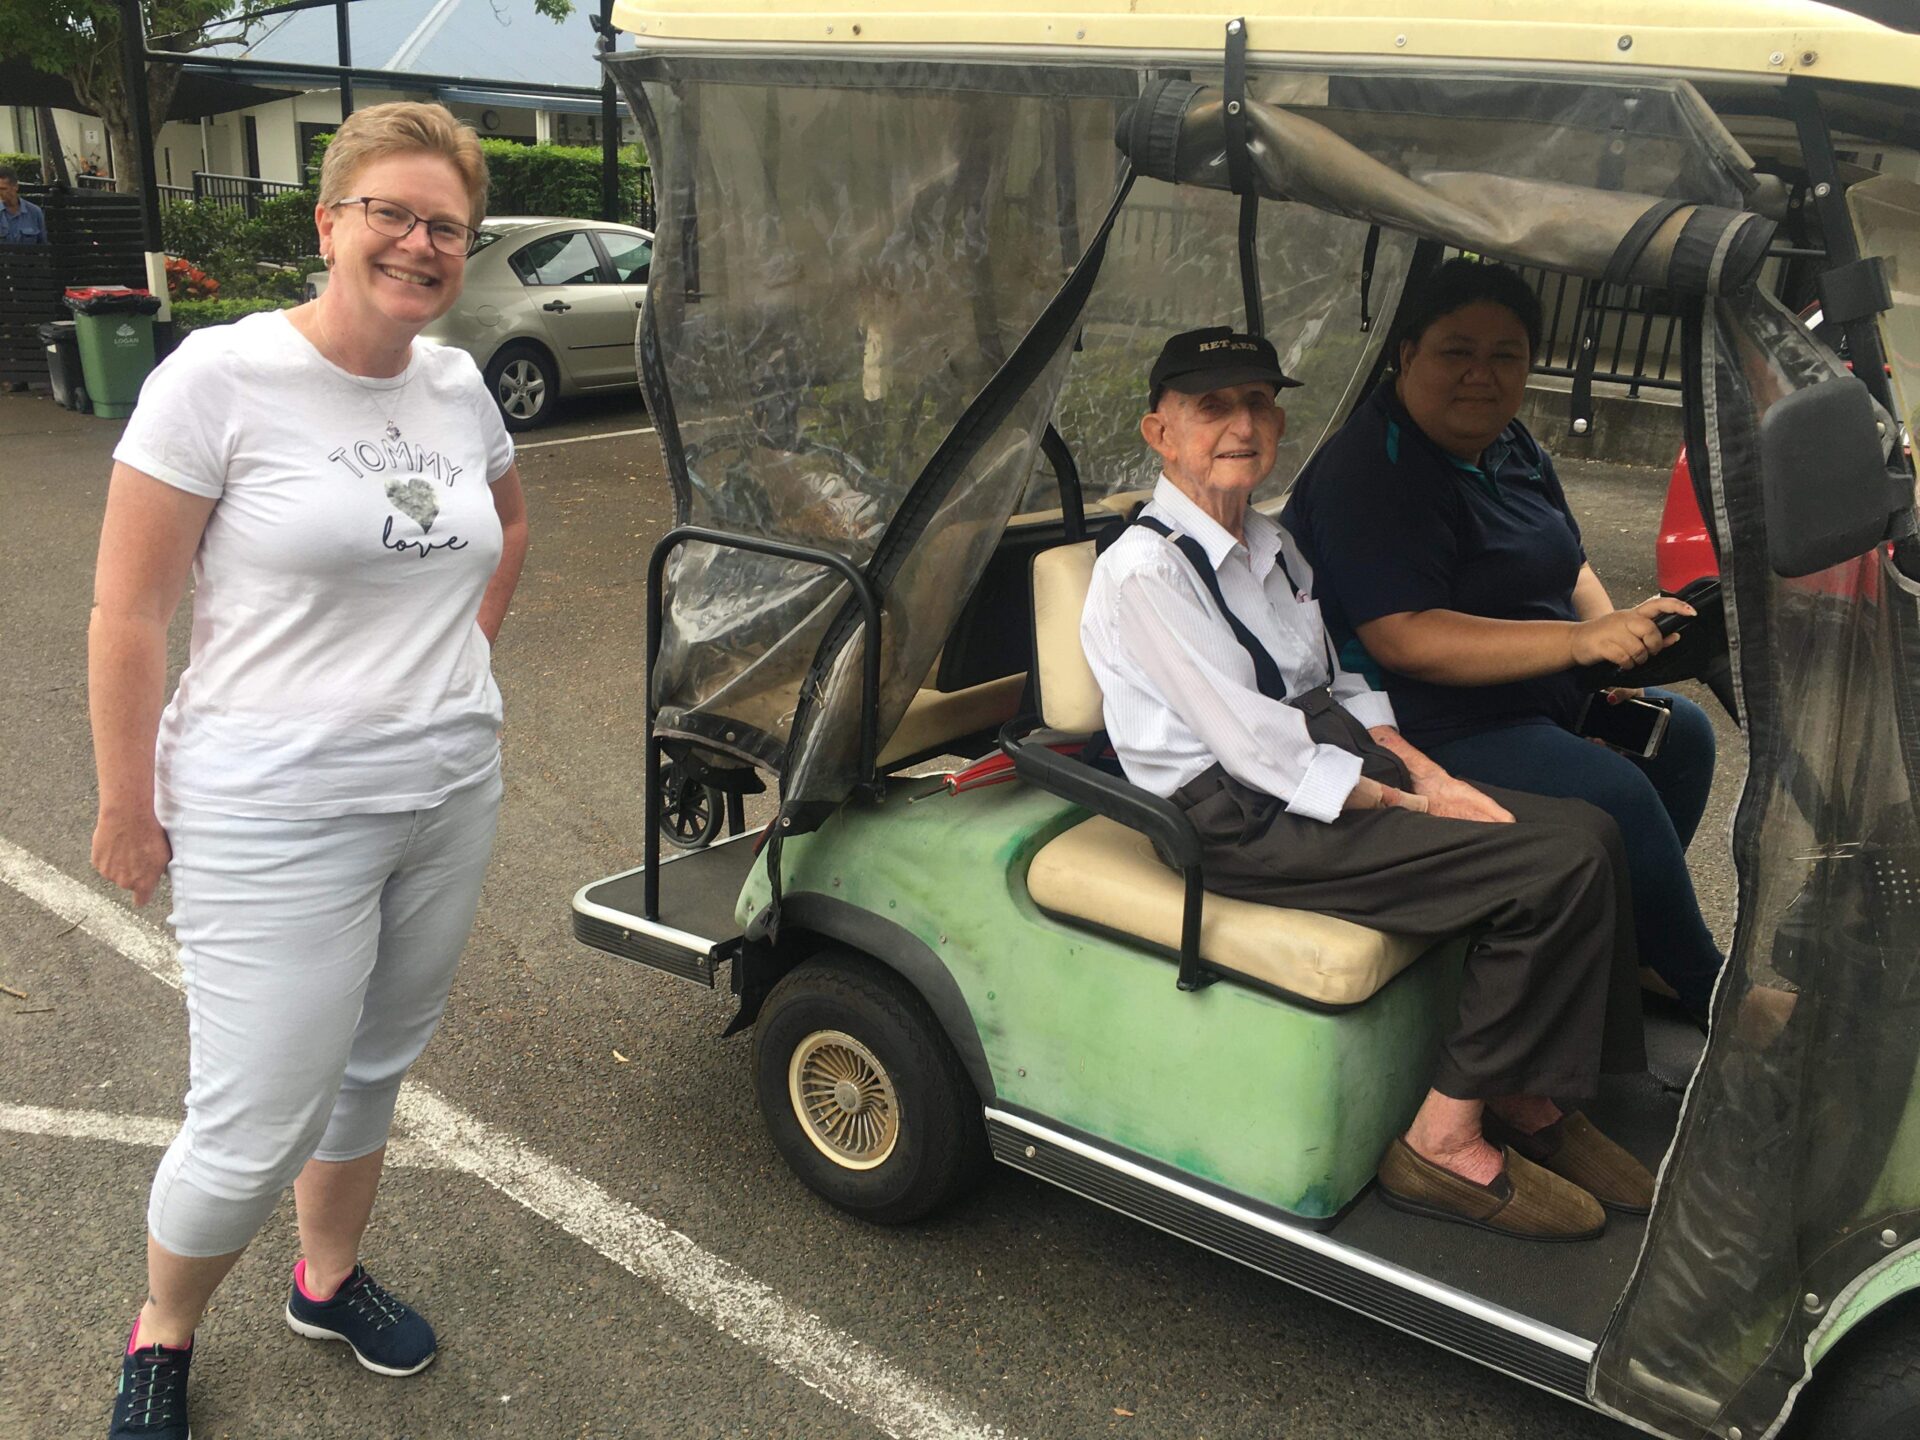 A Caucasian women with short blonde hair standing next to a golf cart which her grandfather, an elderly Caucasian man in a black cap sits alongside a nursing home worker.